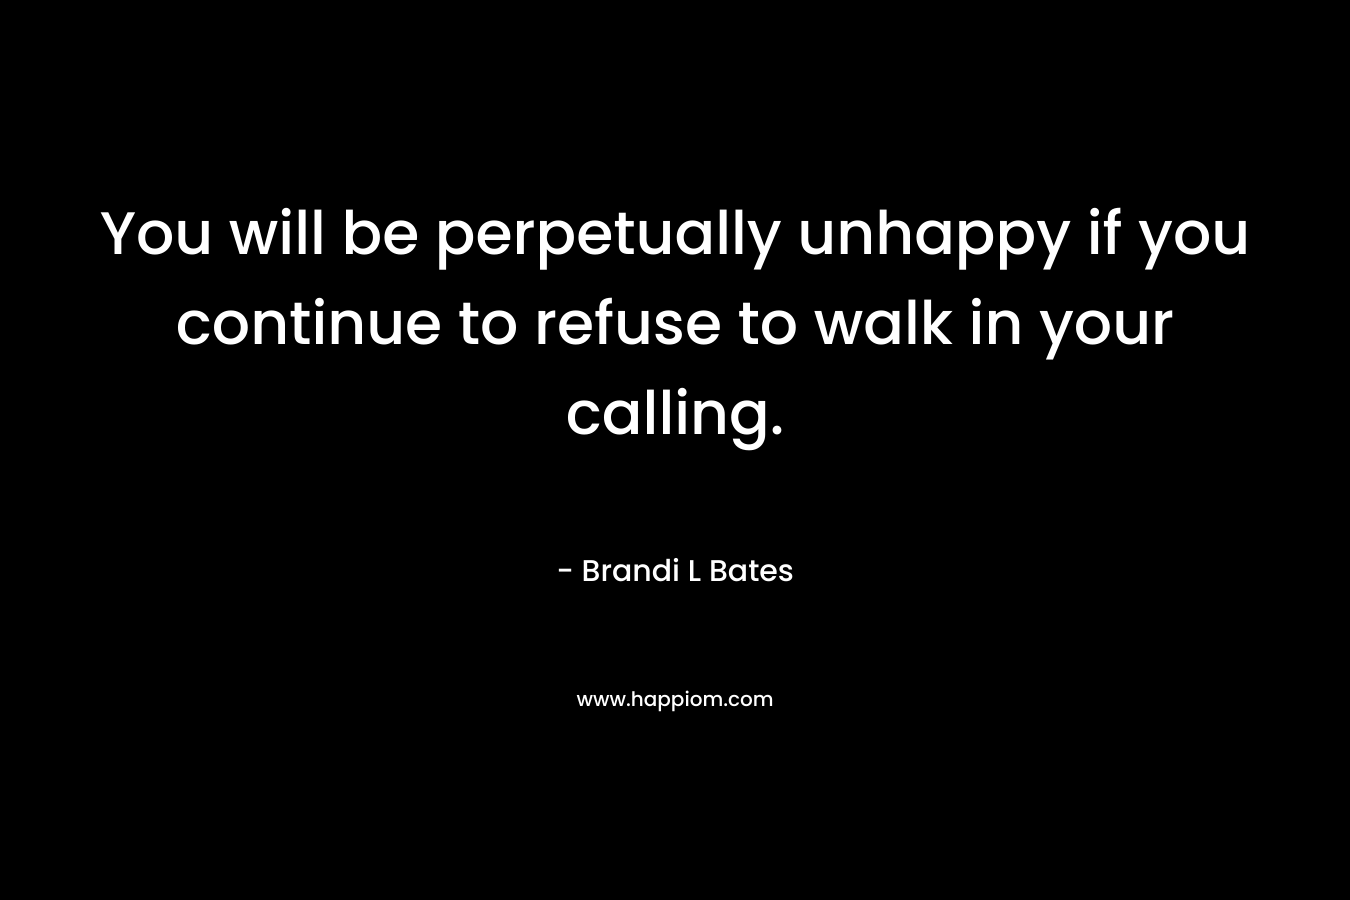 You will be perpetually unhappy if you continue to refuse to walk in your calling.